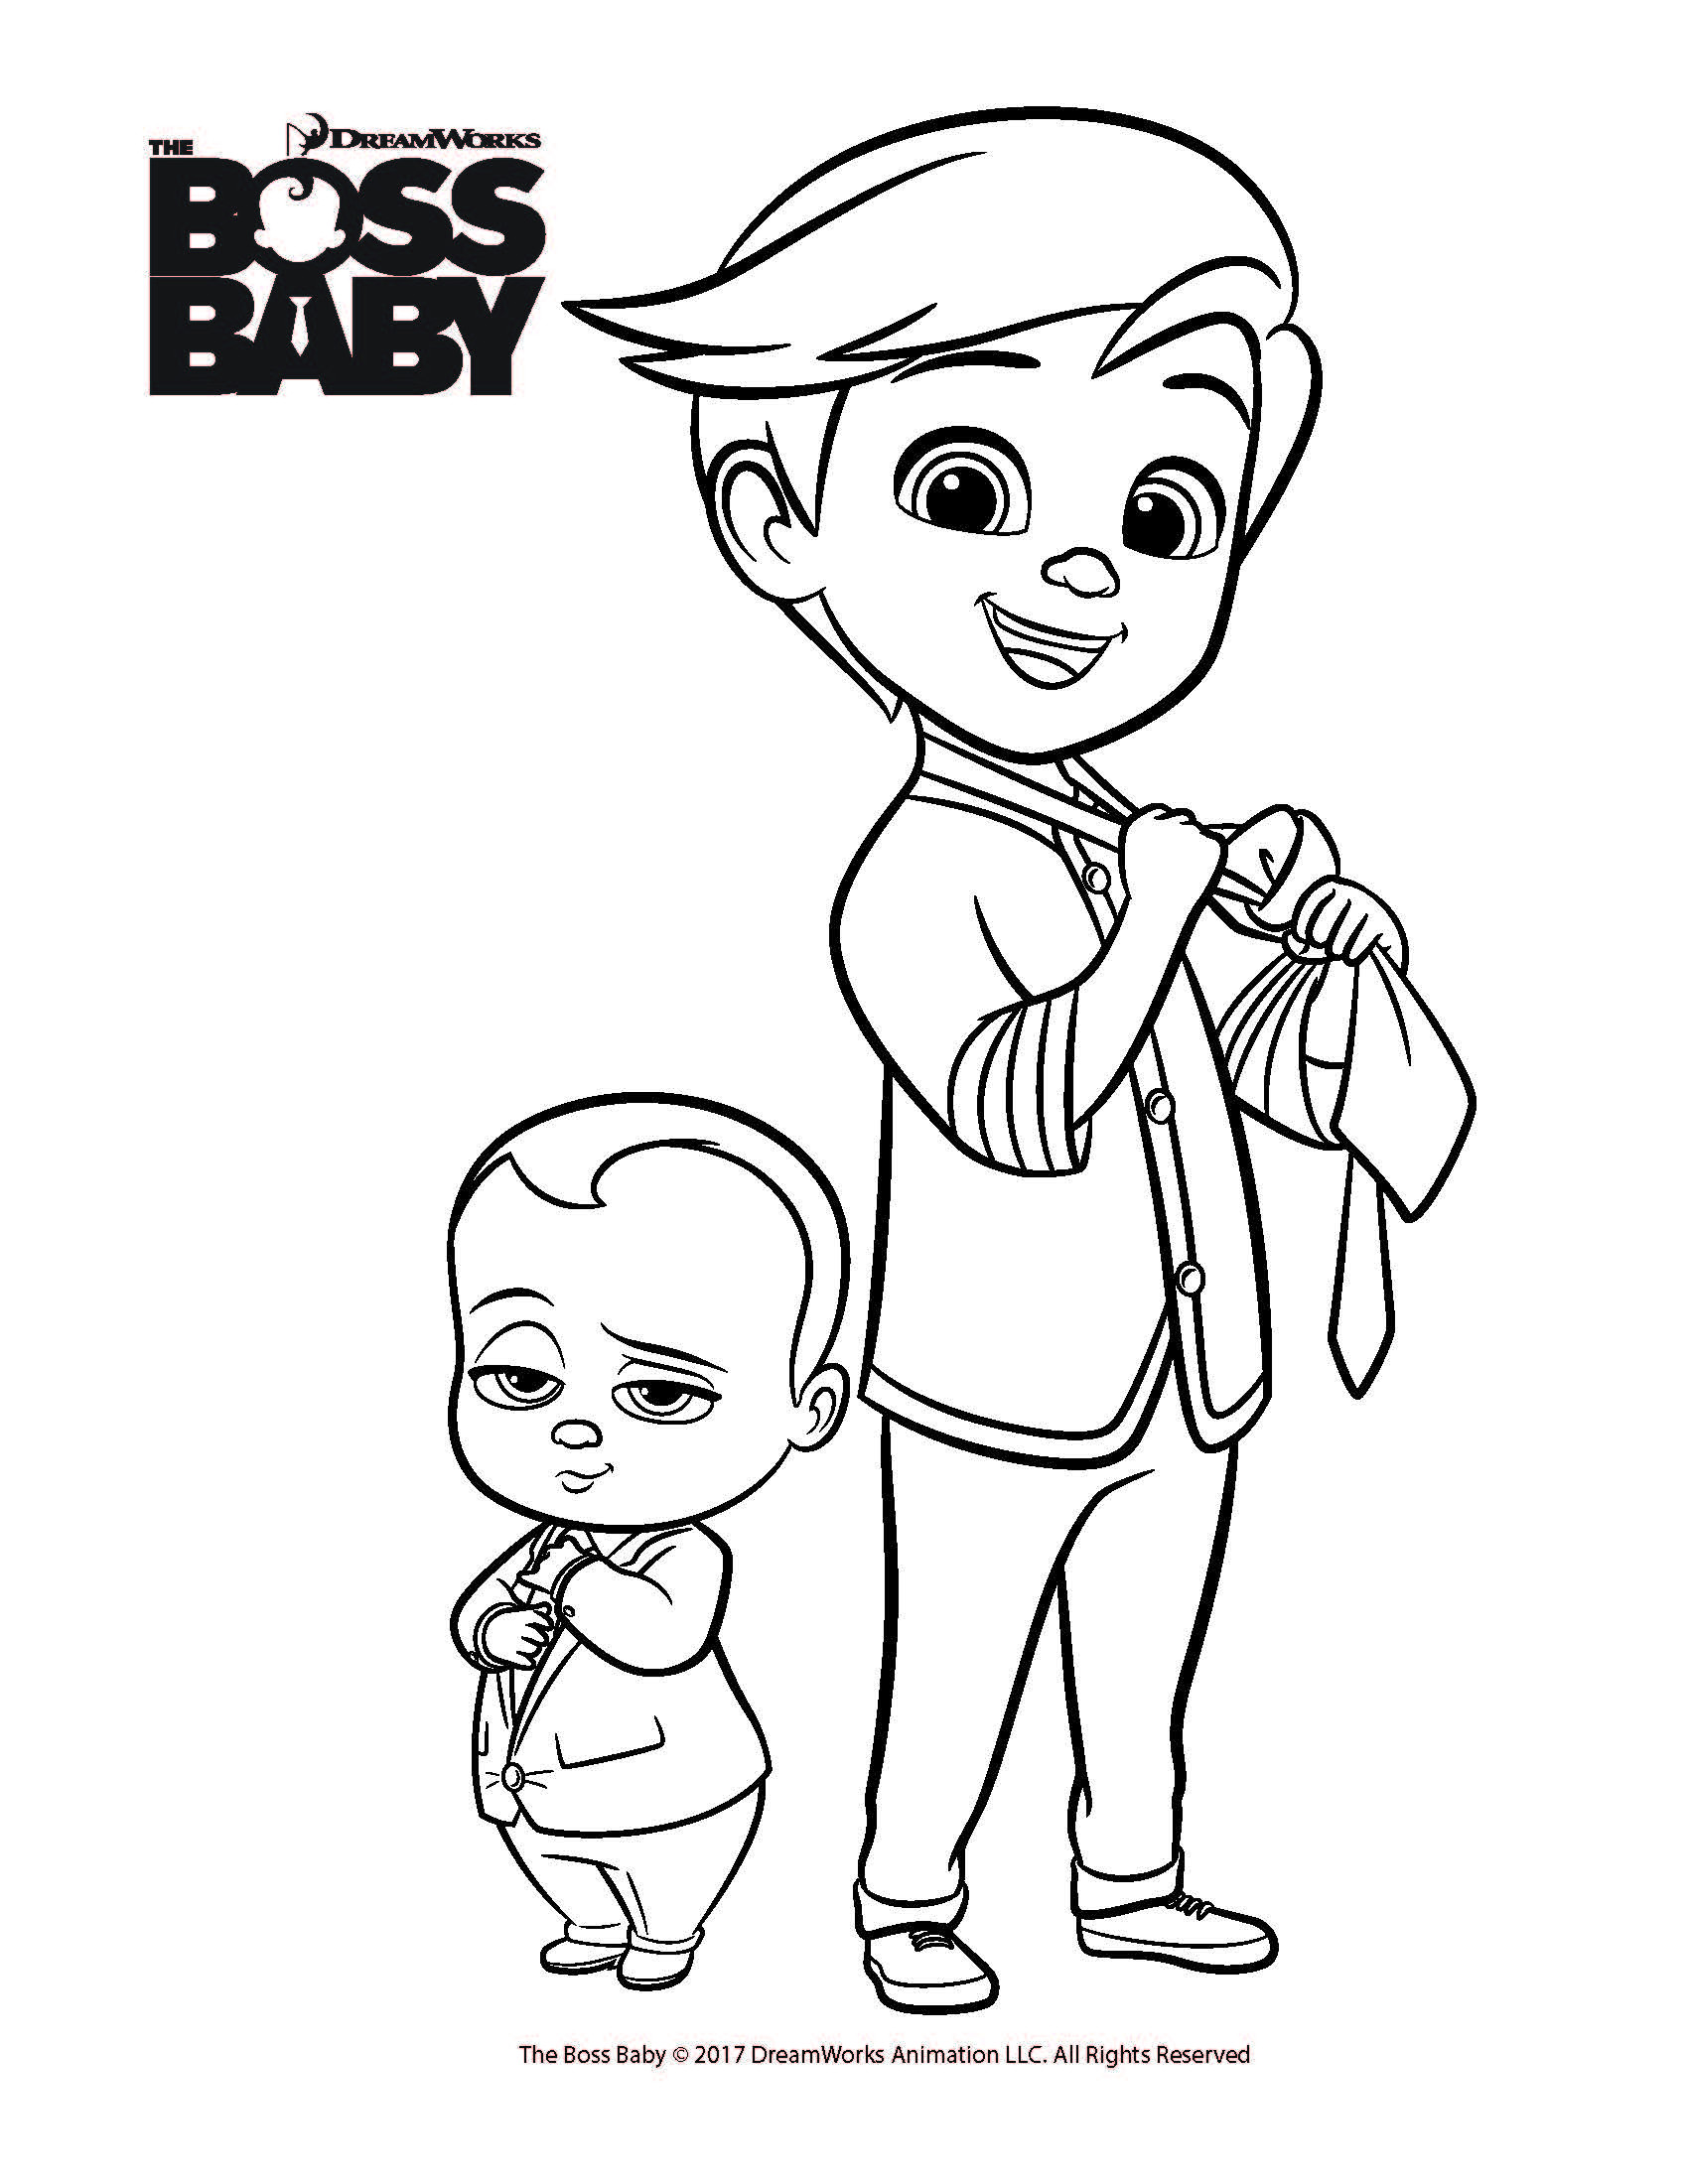 Baby Printable Coloring Pages
 Free coloring printables for The Boss Baby from Dreamworks